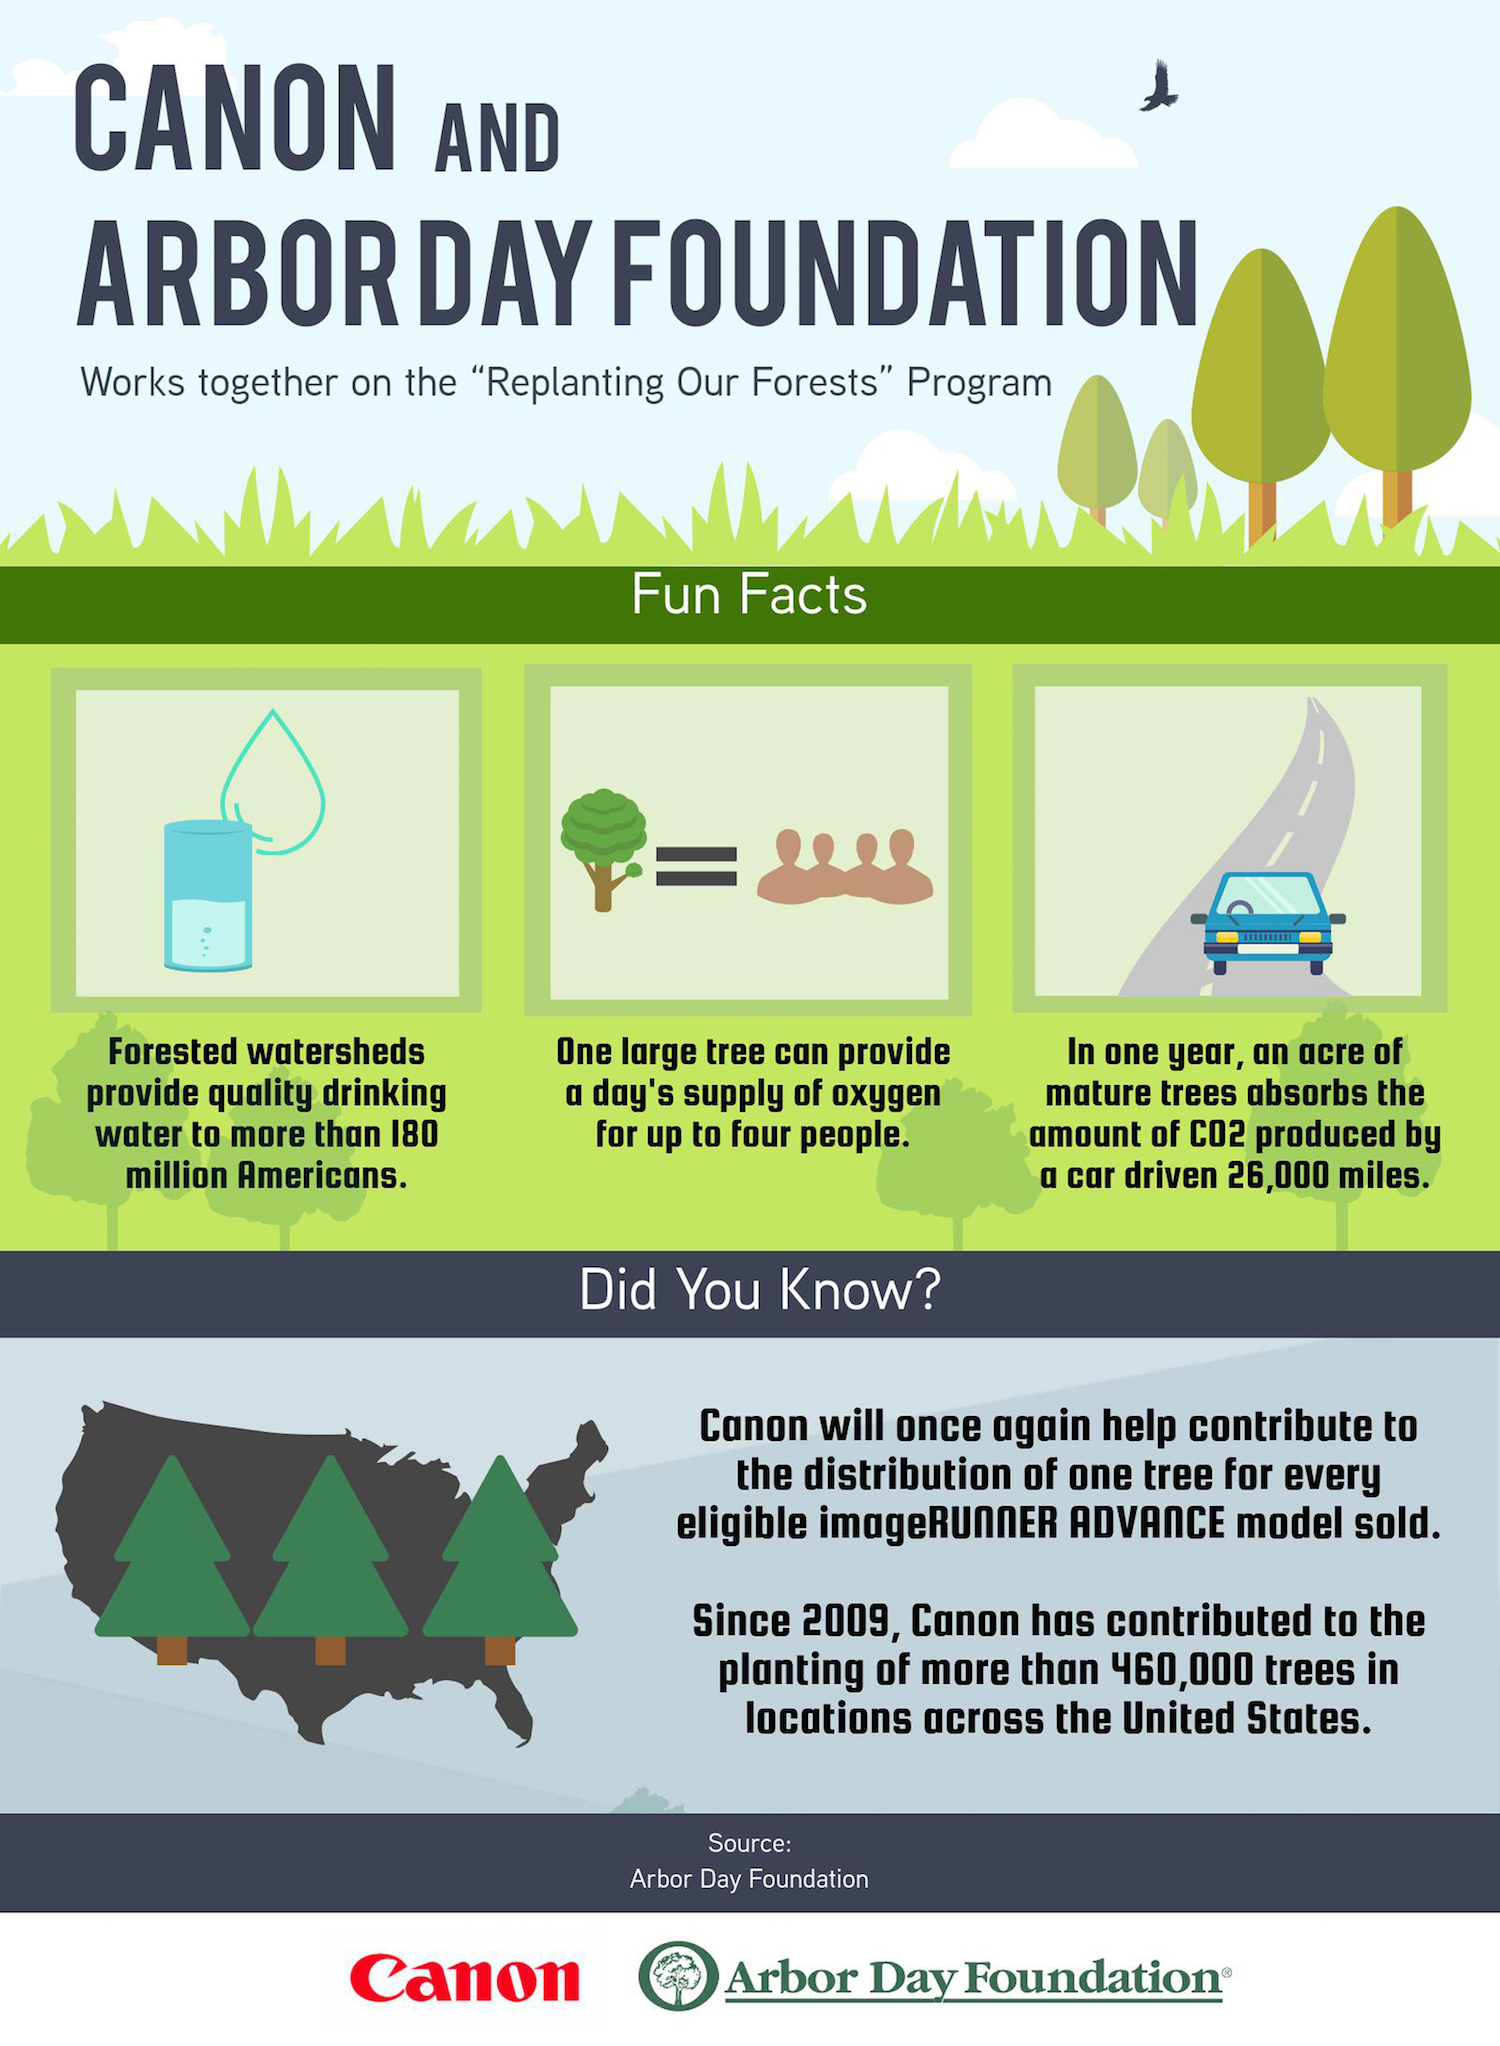 Canon Supports Arbor Day Foundation and Reforestation Program For 10th Year